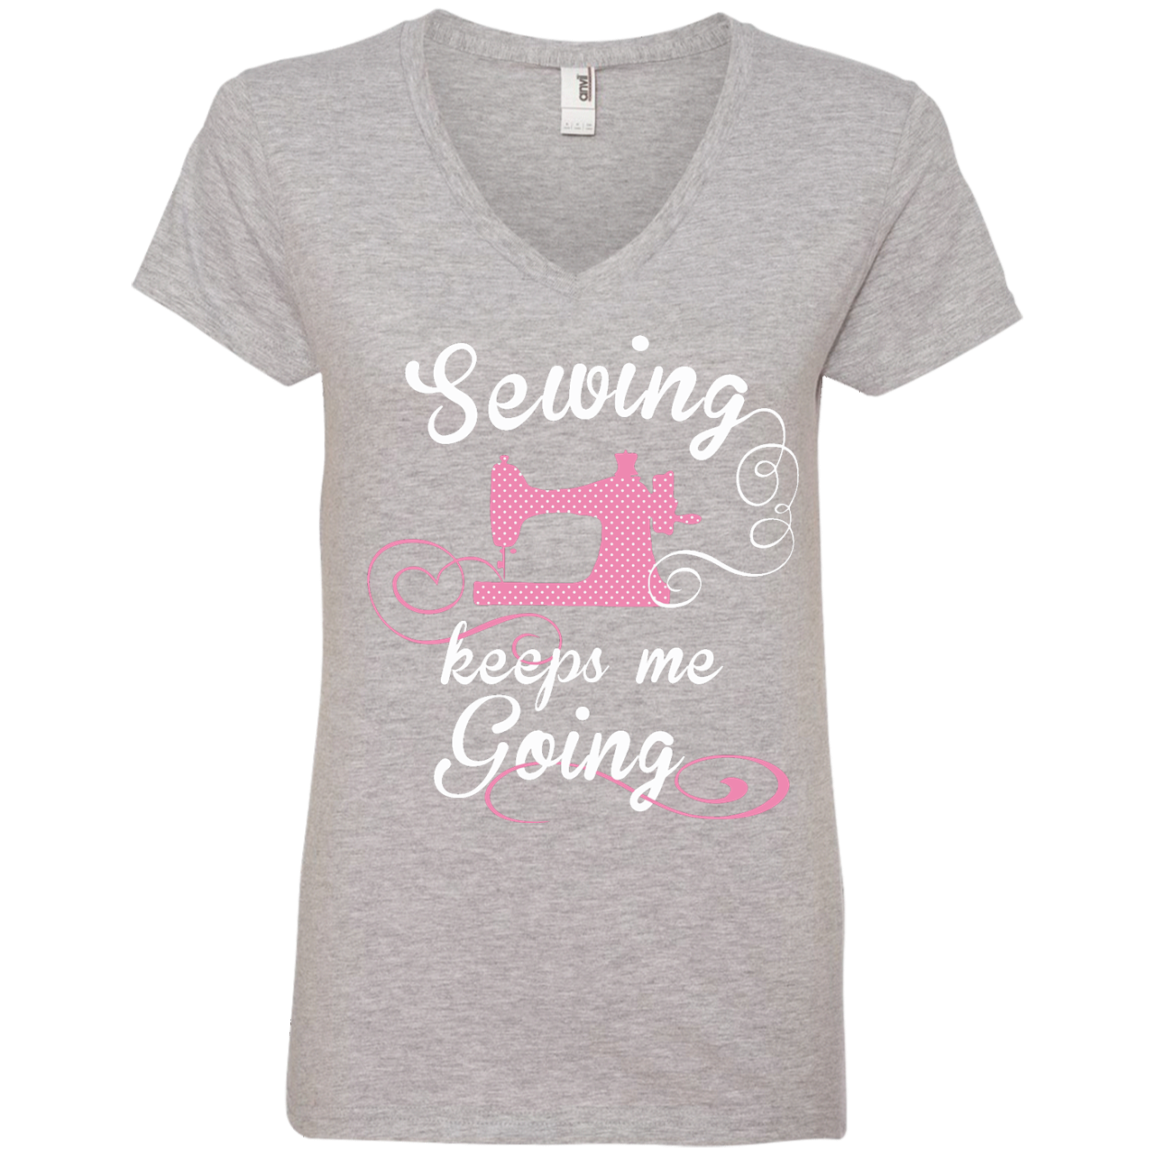 Sewing Keeps Me Going Ladies V-Neck Tee - Crafter4Life - 4